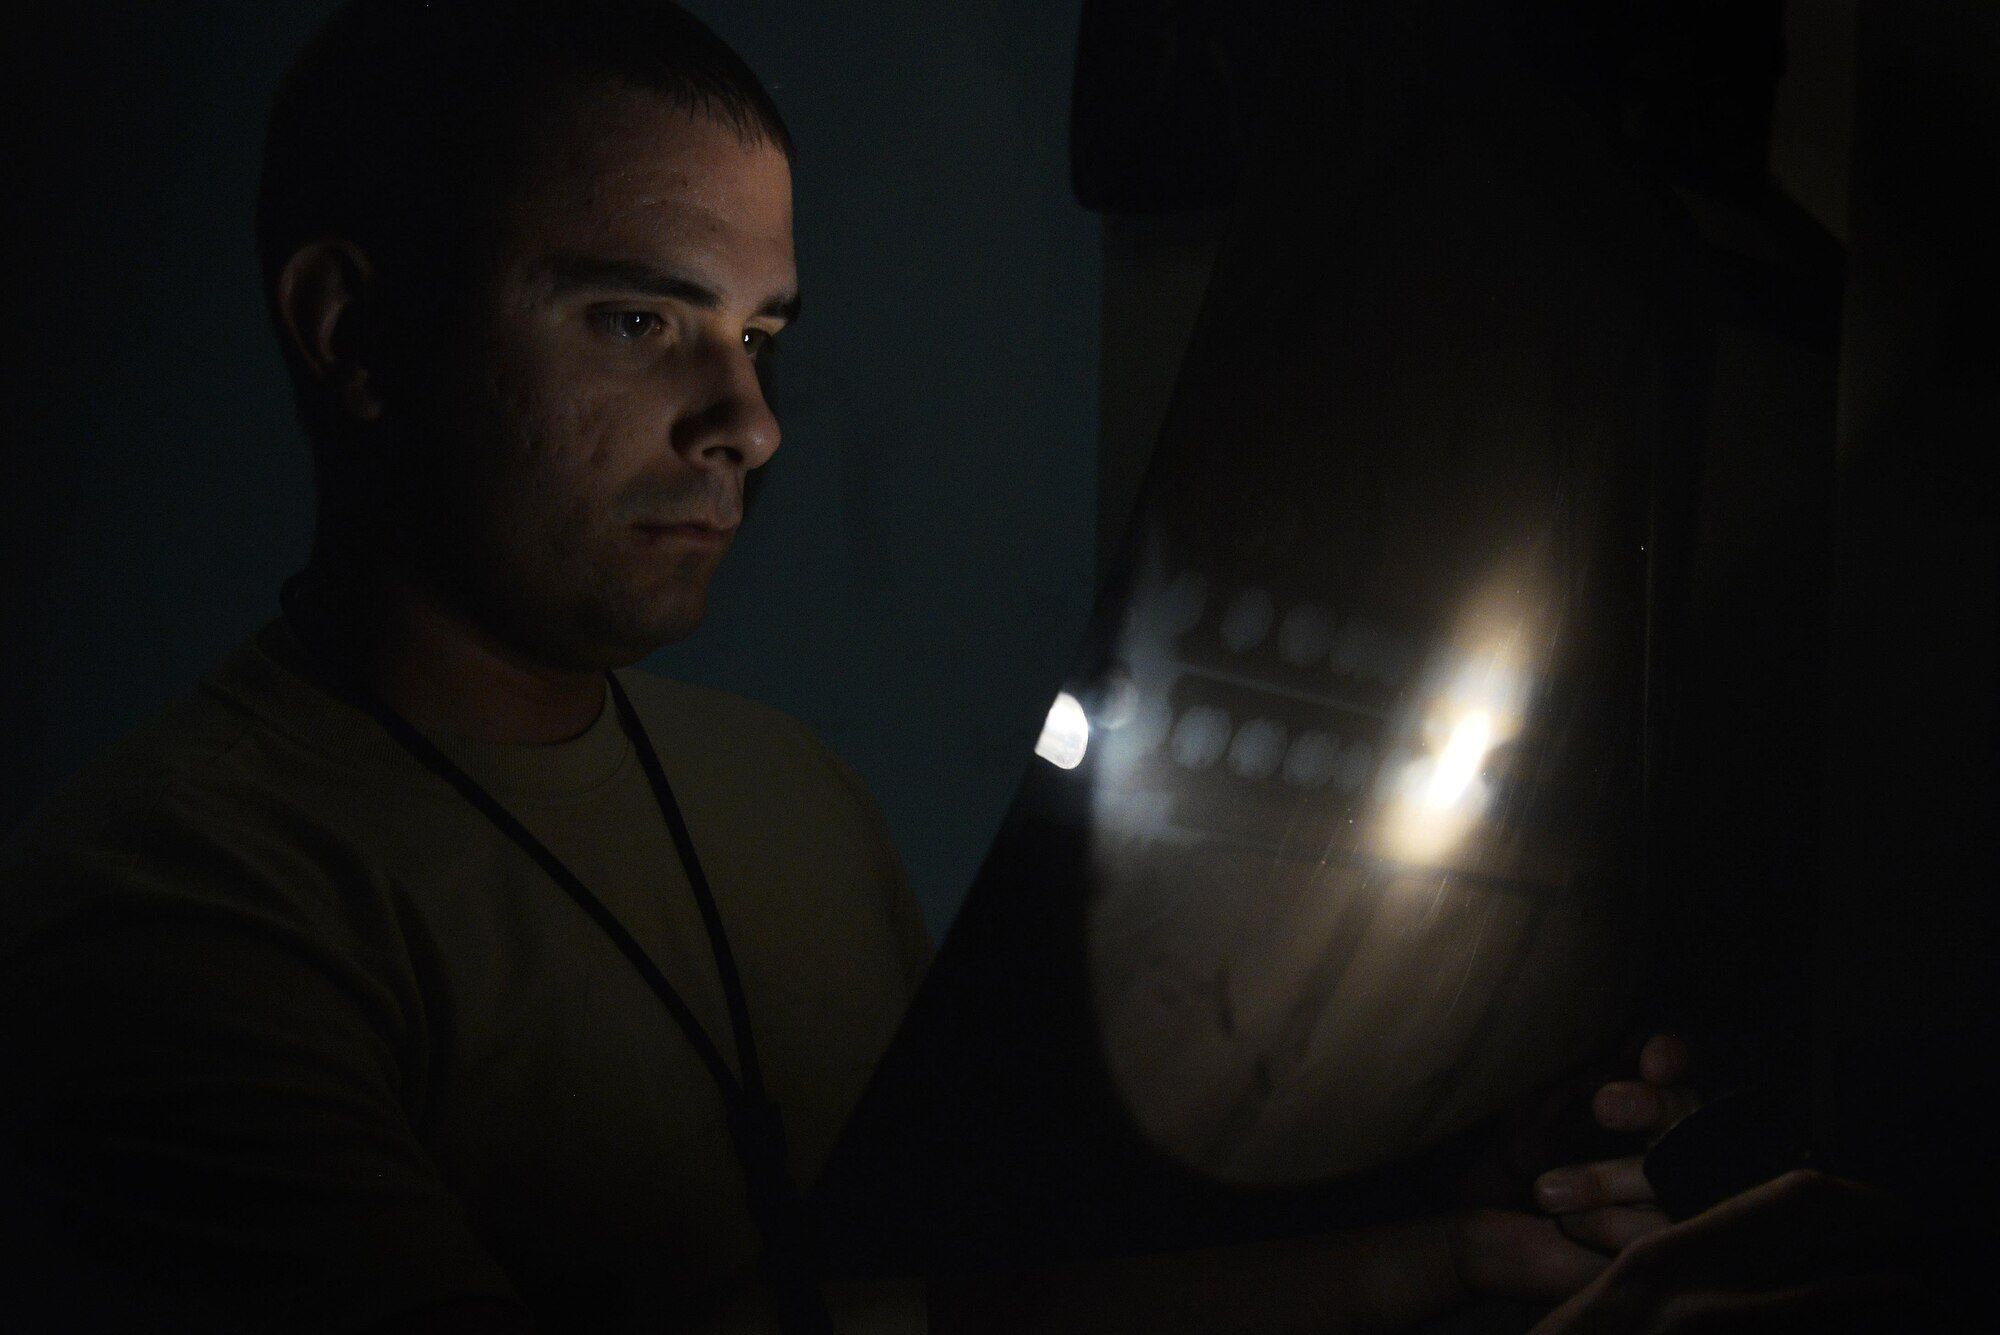 Senior Airman Christopher reviews an X-ray of an F-15E for cracks at an undisclosed location in Southwest Asia September 15, 2015. Nondestructive inspection uses X-rays to look inside aircrafts to identify damage. Christopher is a nondestructive inspection journeyman assigned to the 380th Expeditionary Maintenance Squadron. (U.S. Air Force photo/Tech. Sgt. Christopher Boitz)